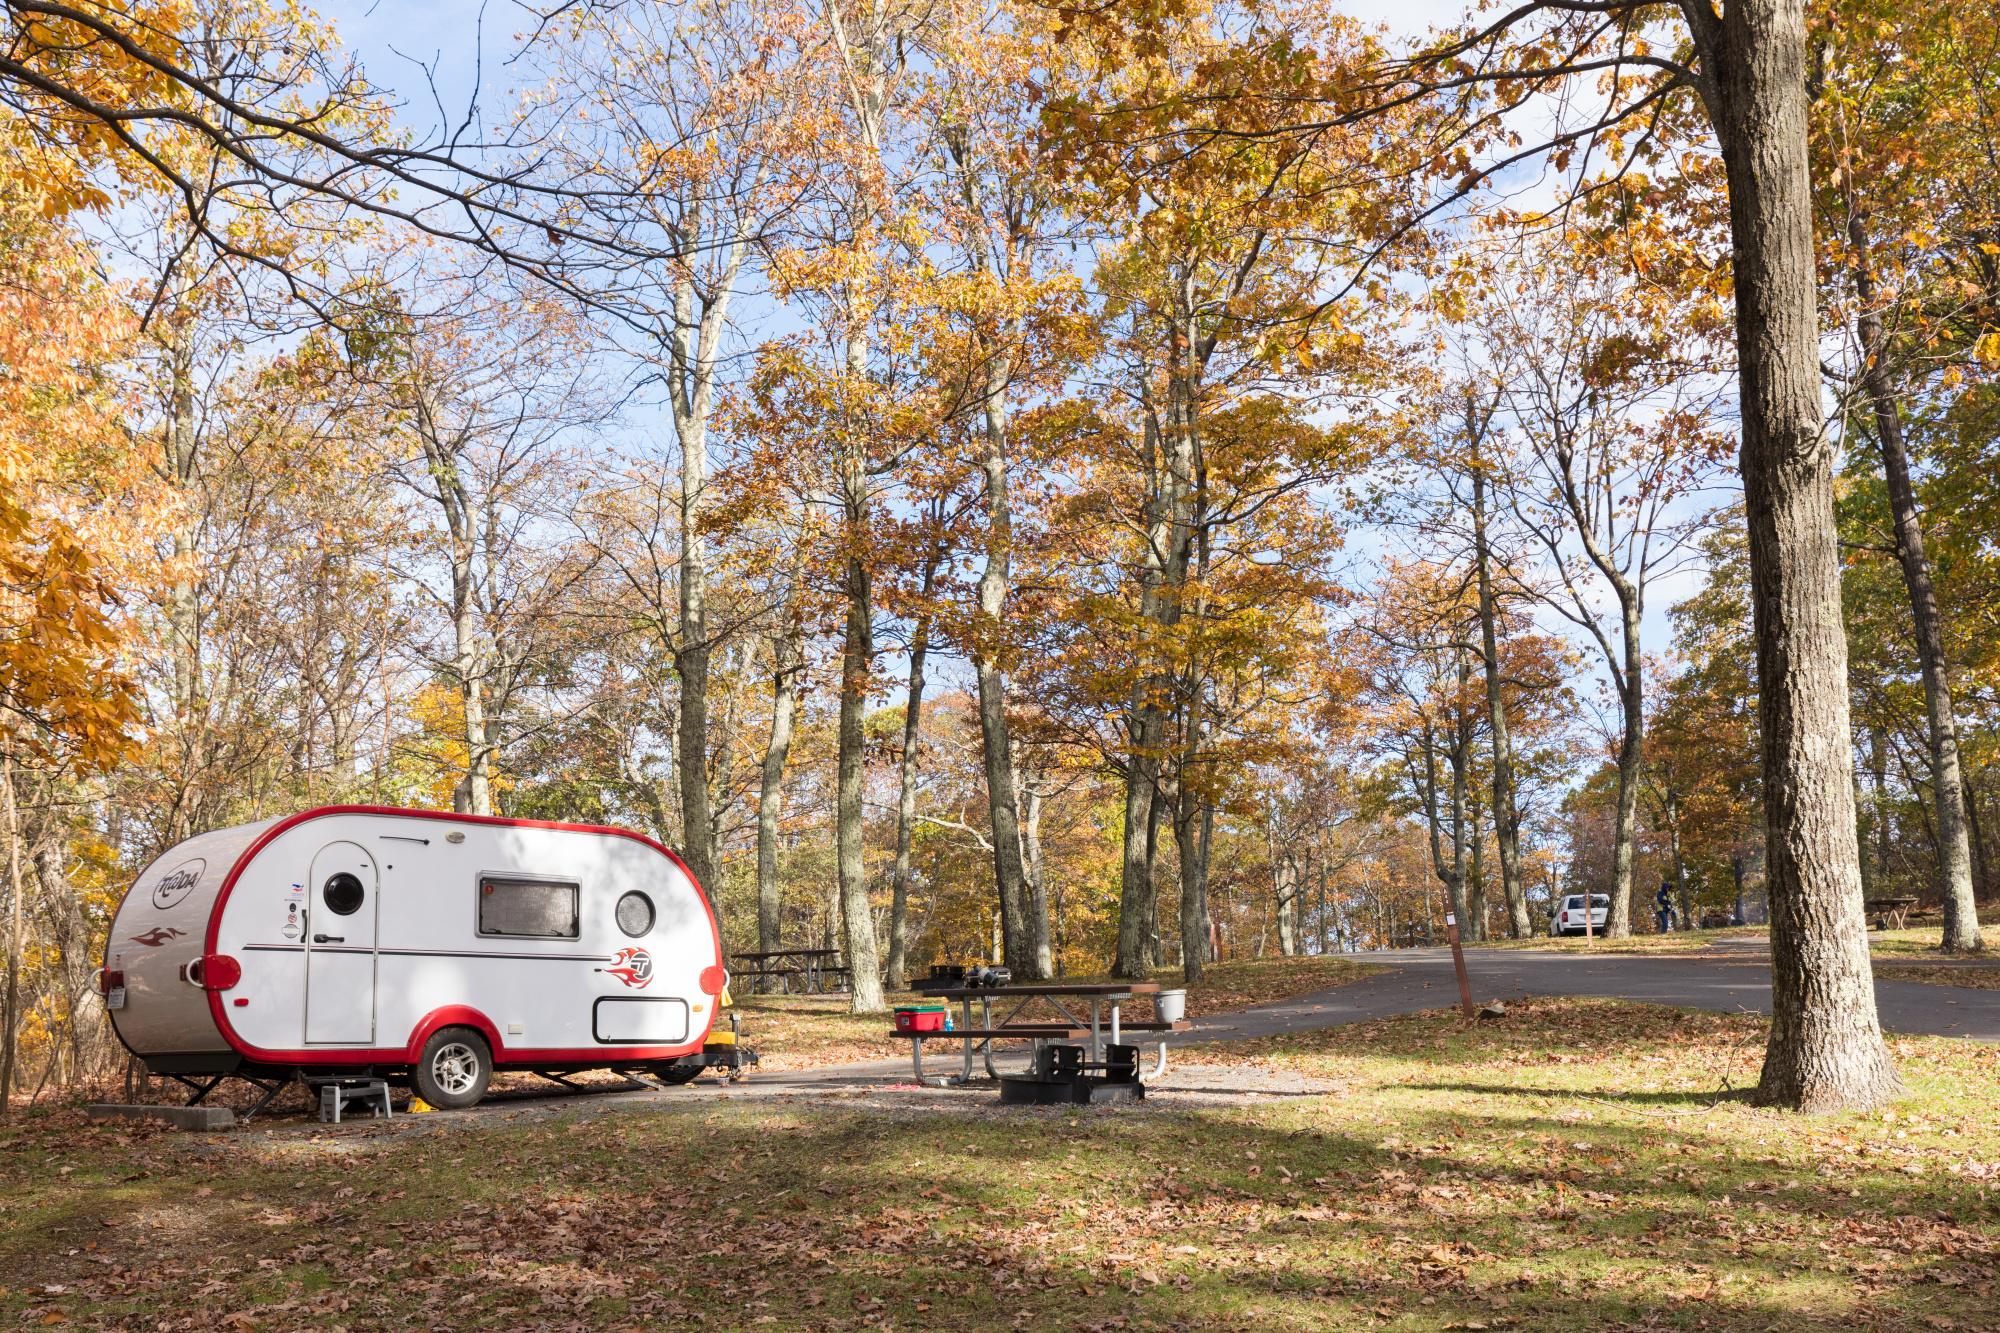 A white and red camper sits in a campsite under fall foliage.